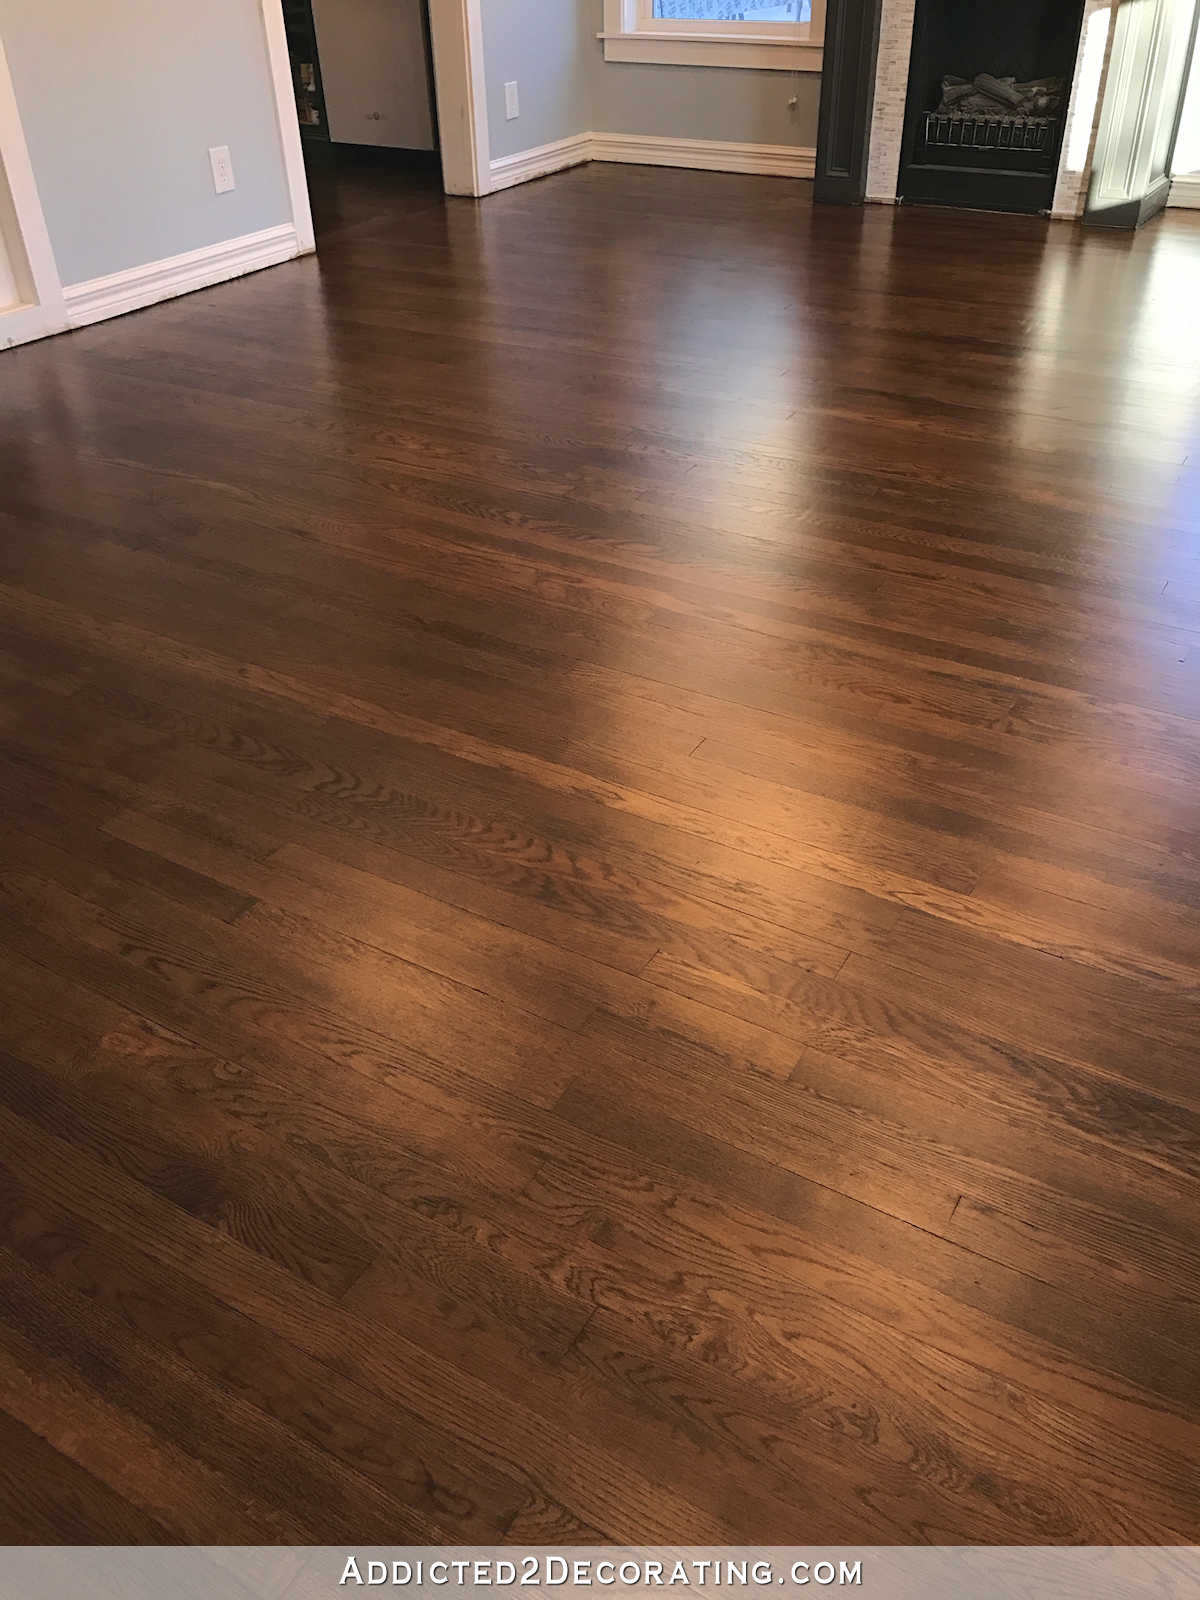 refinished red oak hardwood floors - entryway and living room